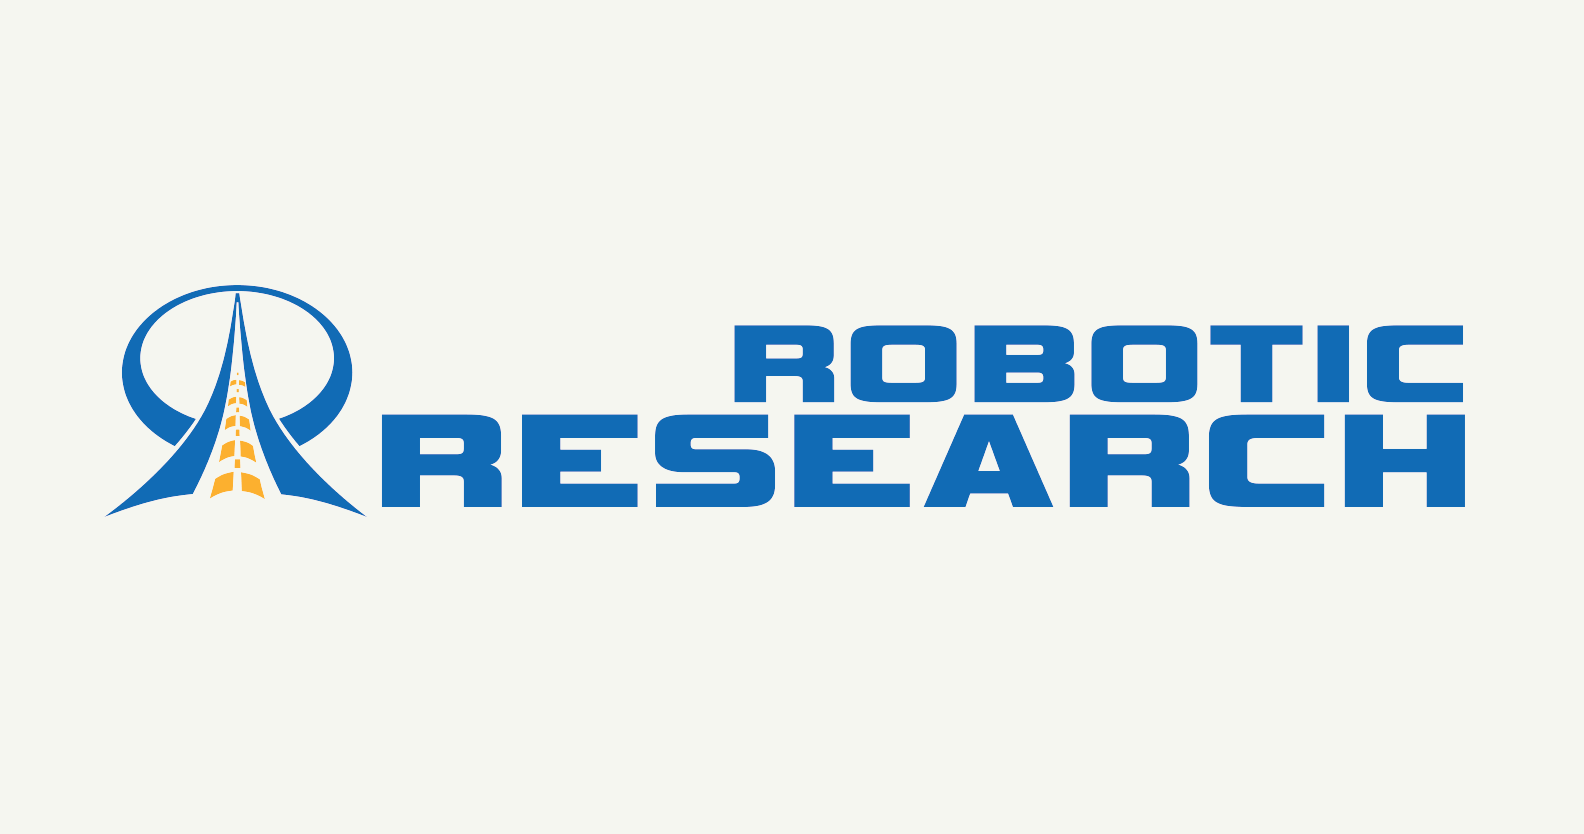 Blue Robotic Research logo on a cream background